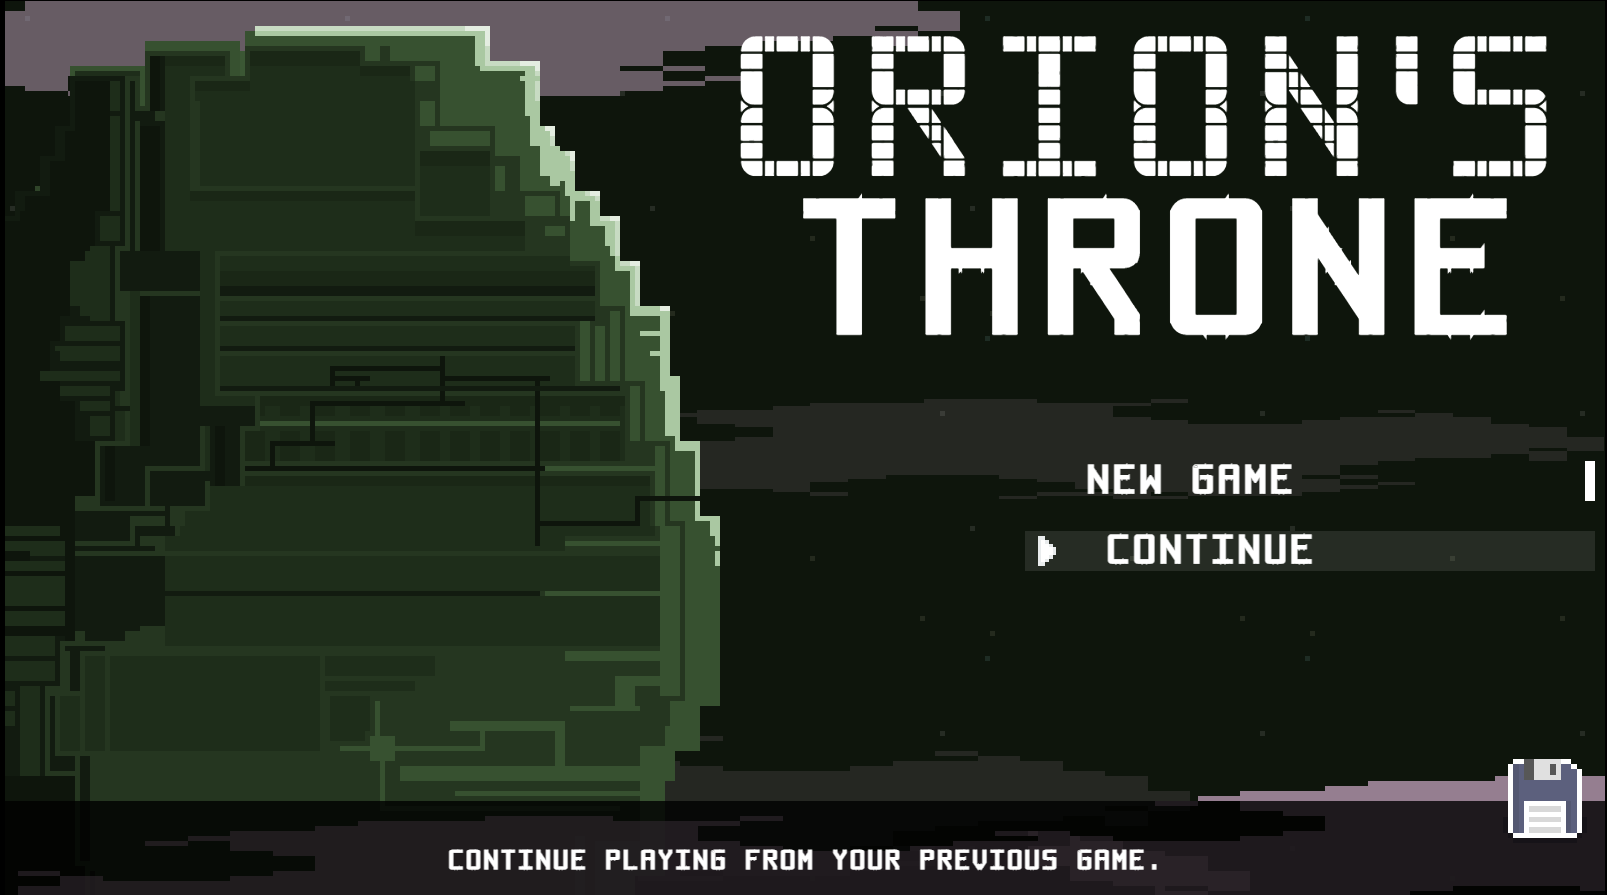 Orion's Throne Demo